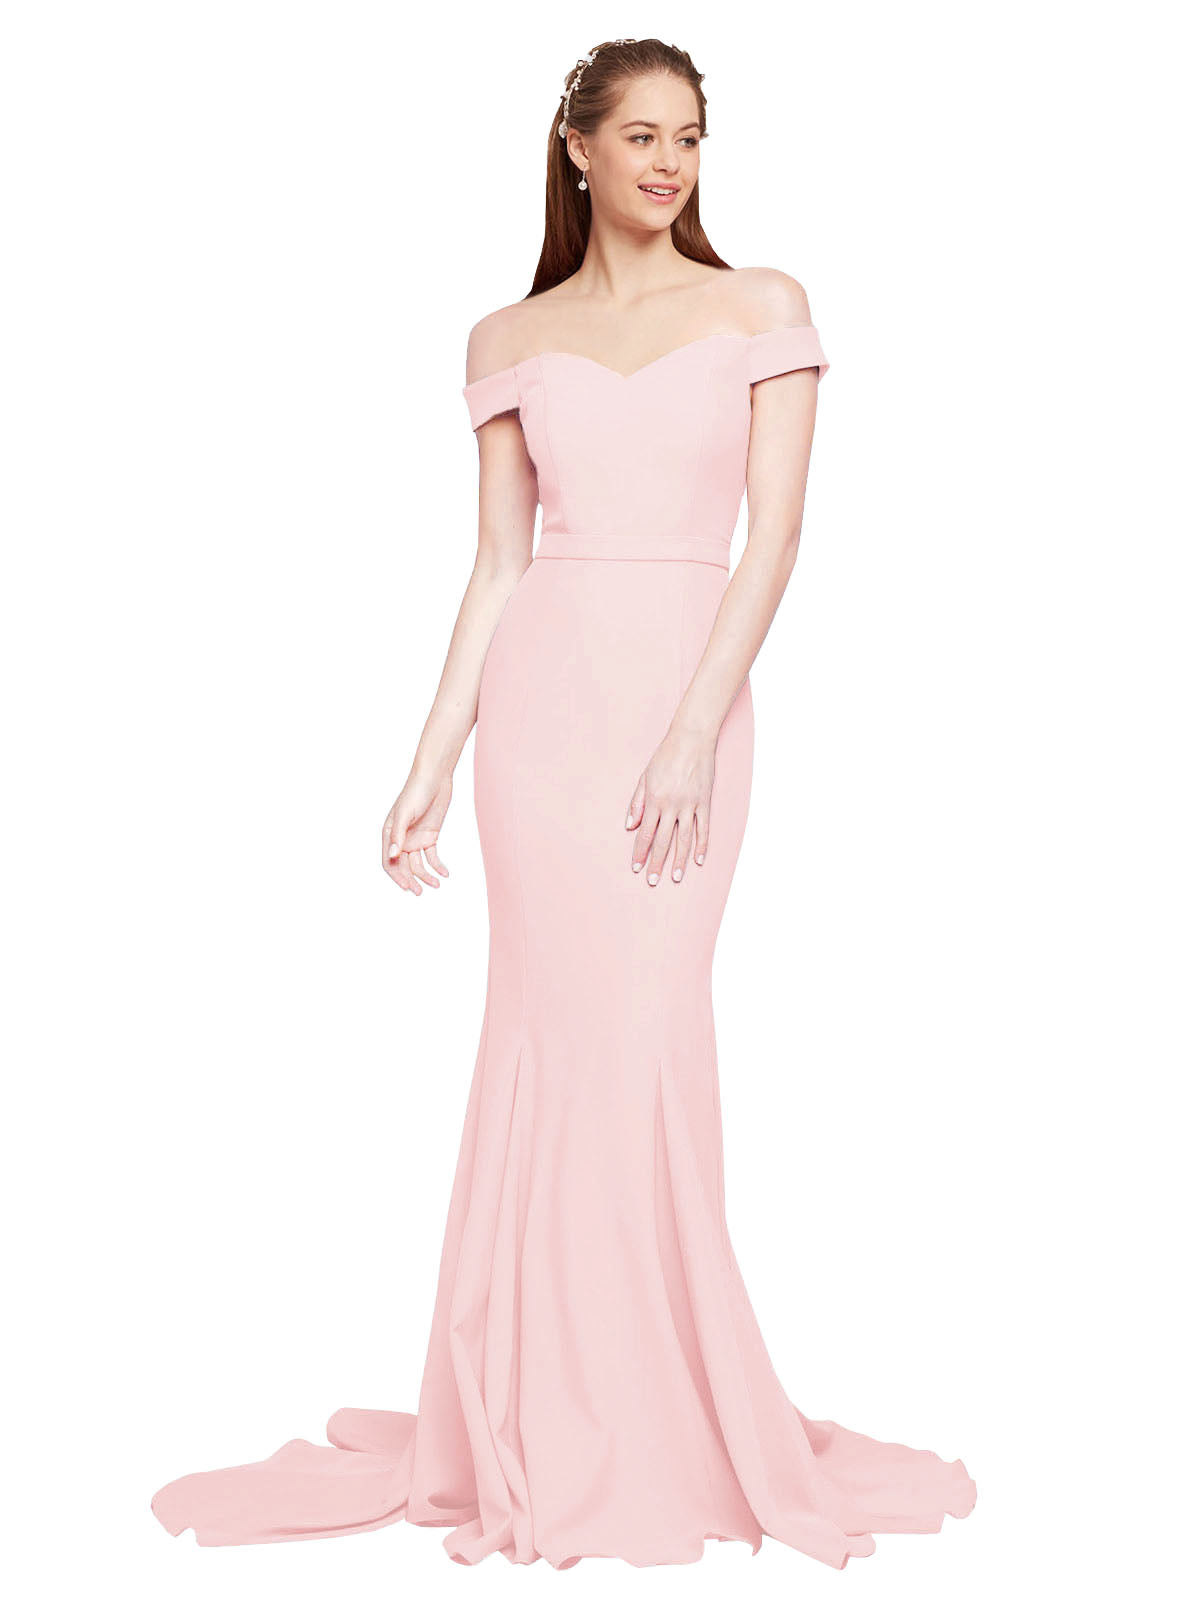 RightBrides Jannet Long Mermaid Off the Shoulder Sweetheart Sweep Train Floor Length Sleeveless Pink Stretch Crepe Bridesmaid Dress